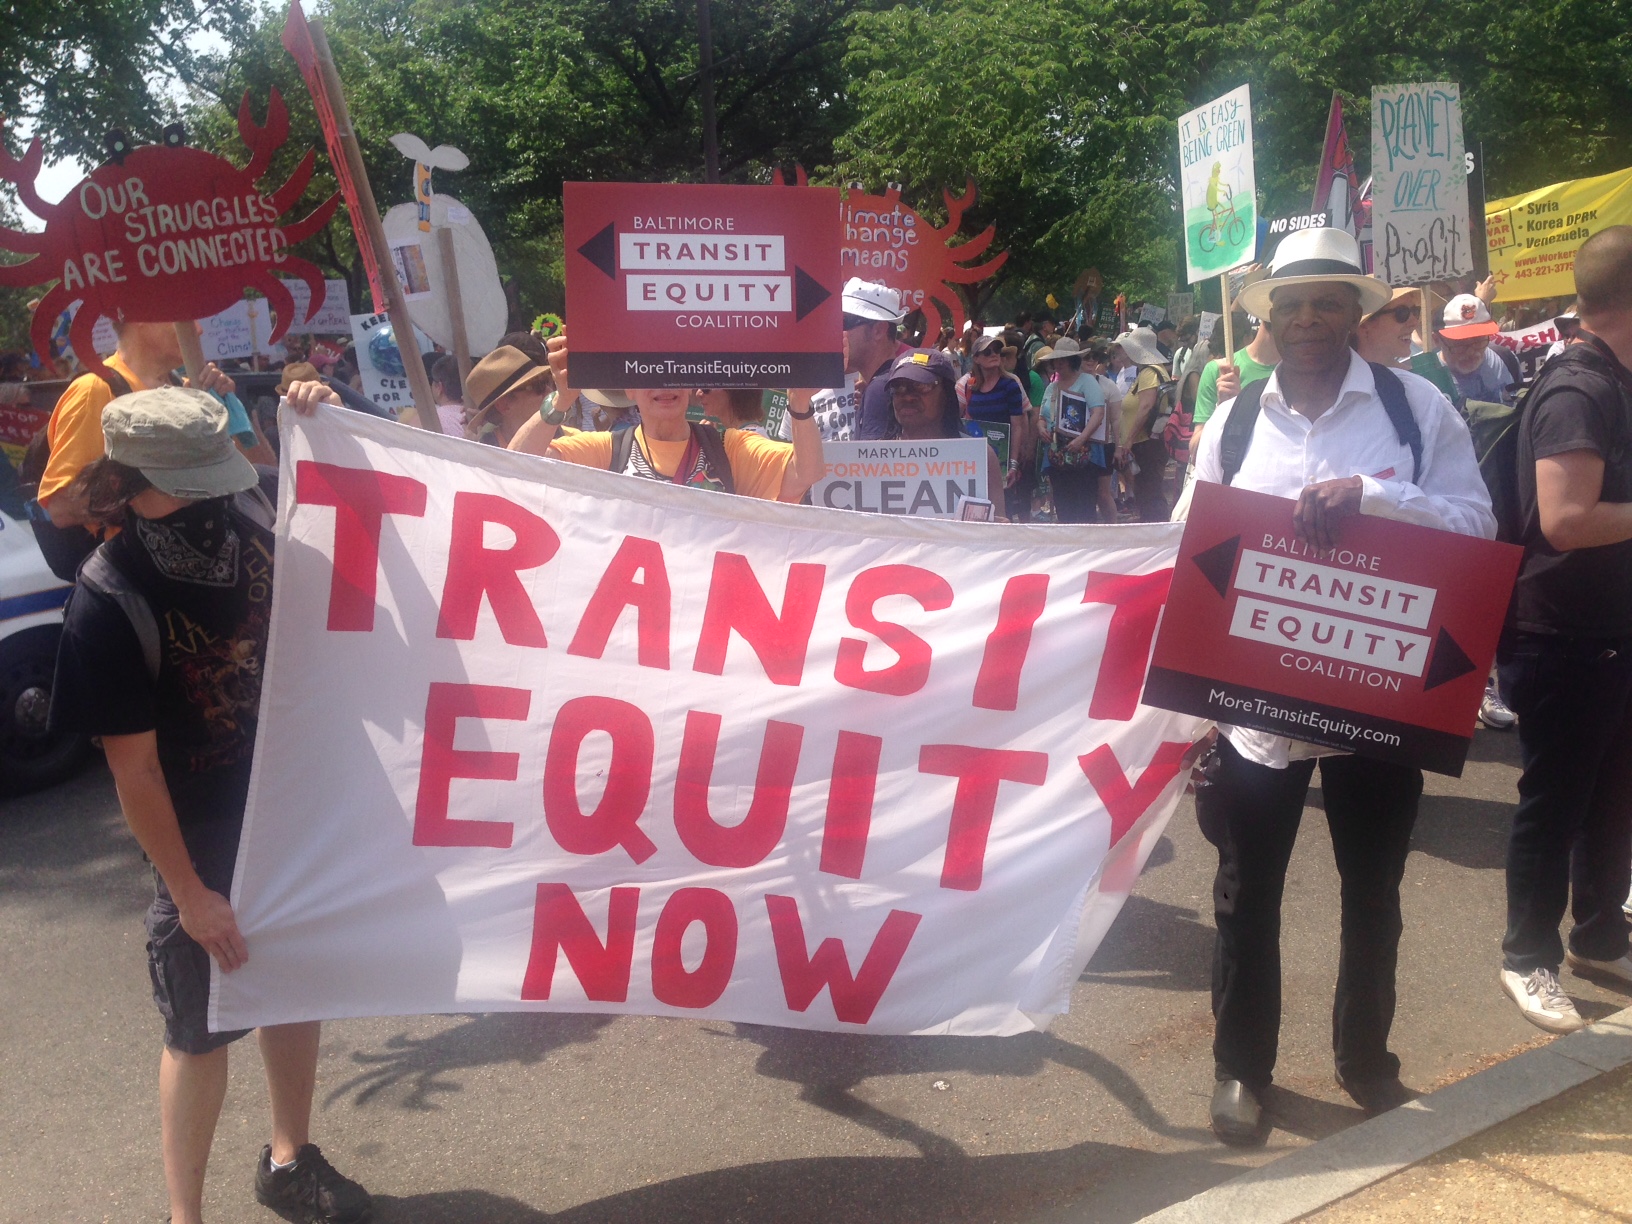 Supporters of the Baltimore Transit Equity Coalition hold a sign at the 2017 Peoples Climate March that reads "Transit Equity Now"